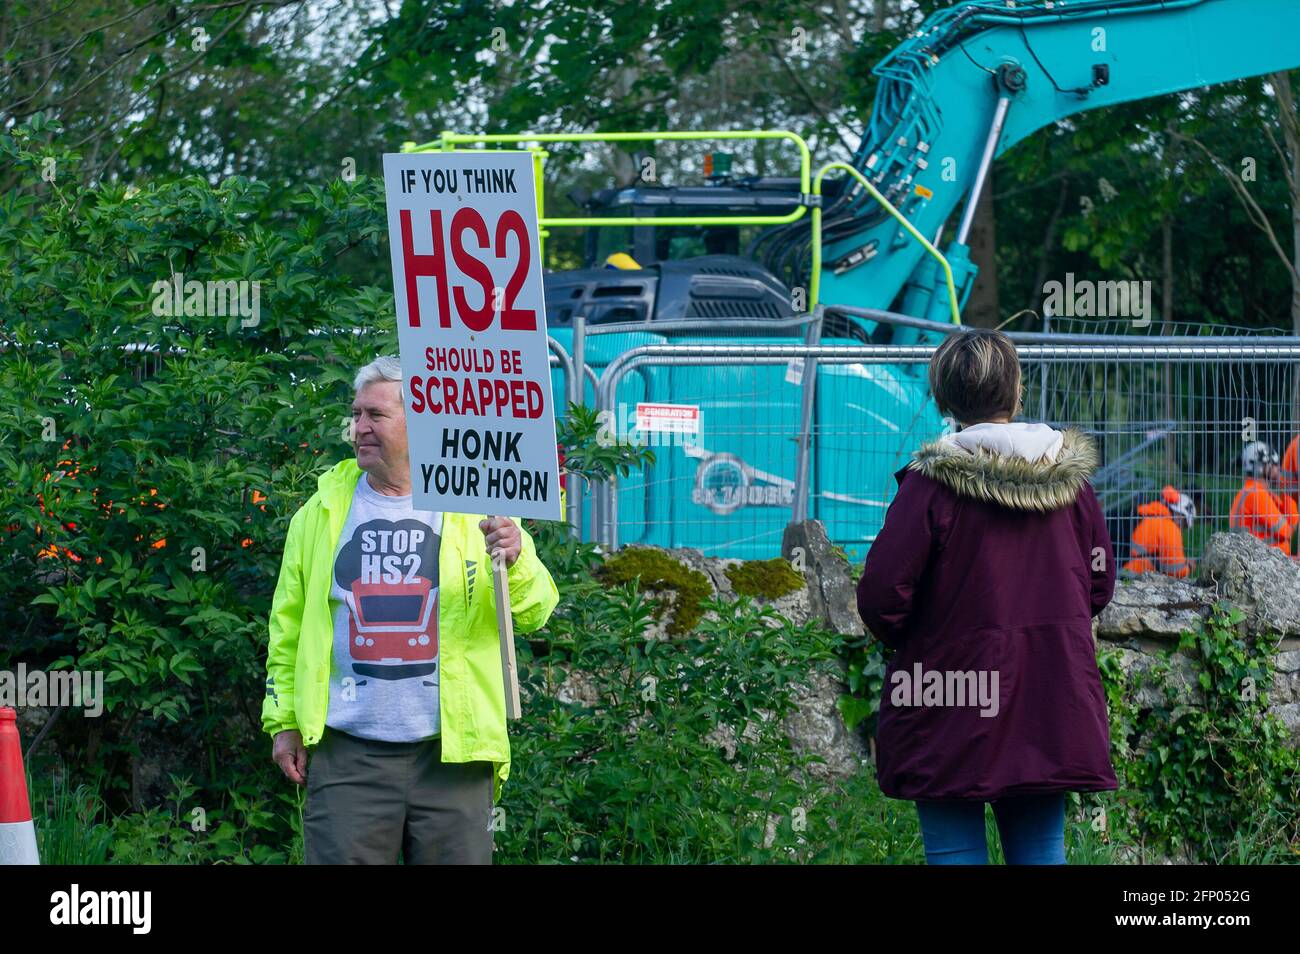 Aylesbury, Buckinghamshire, UK. 19th May, 2021. Local residents and Stop HS2 campaigners were peacefully protesting in Aylesbury today against the High Speed 2 rail which is causing a huge amount of destruction throughout Buckinghamshire. The protesters were getting a lot of support from passing drivers as they hooted their horns for HS2 to be scrapped. Credit: Maureen McLean/Alamy Stock Photo